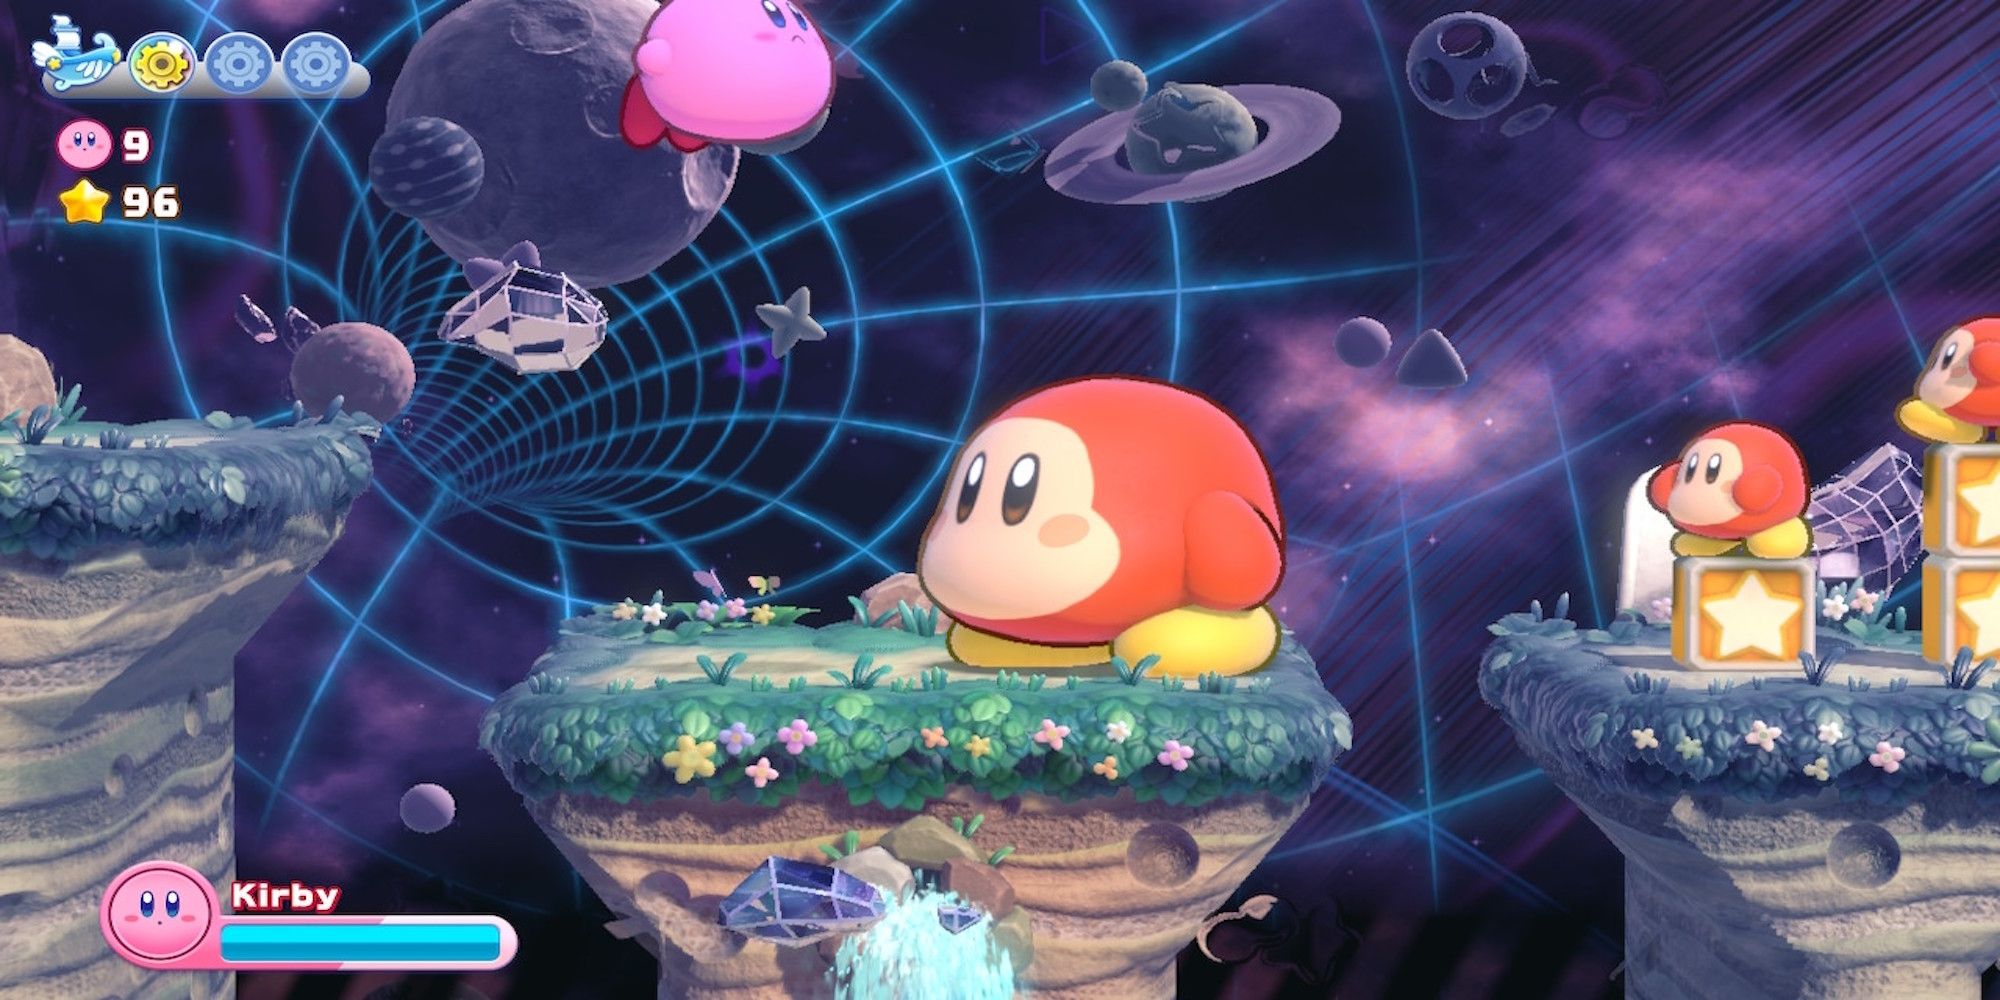 Floating above enemies in Kirby's Return to Dream Land Deluxe